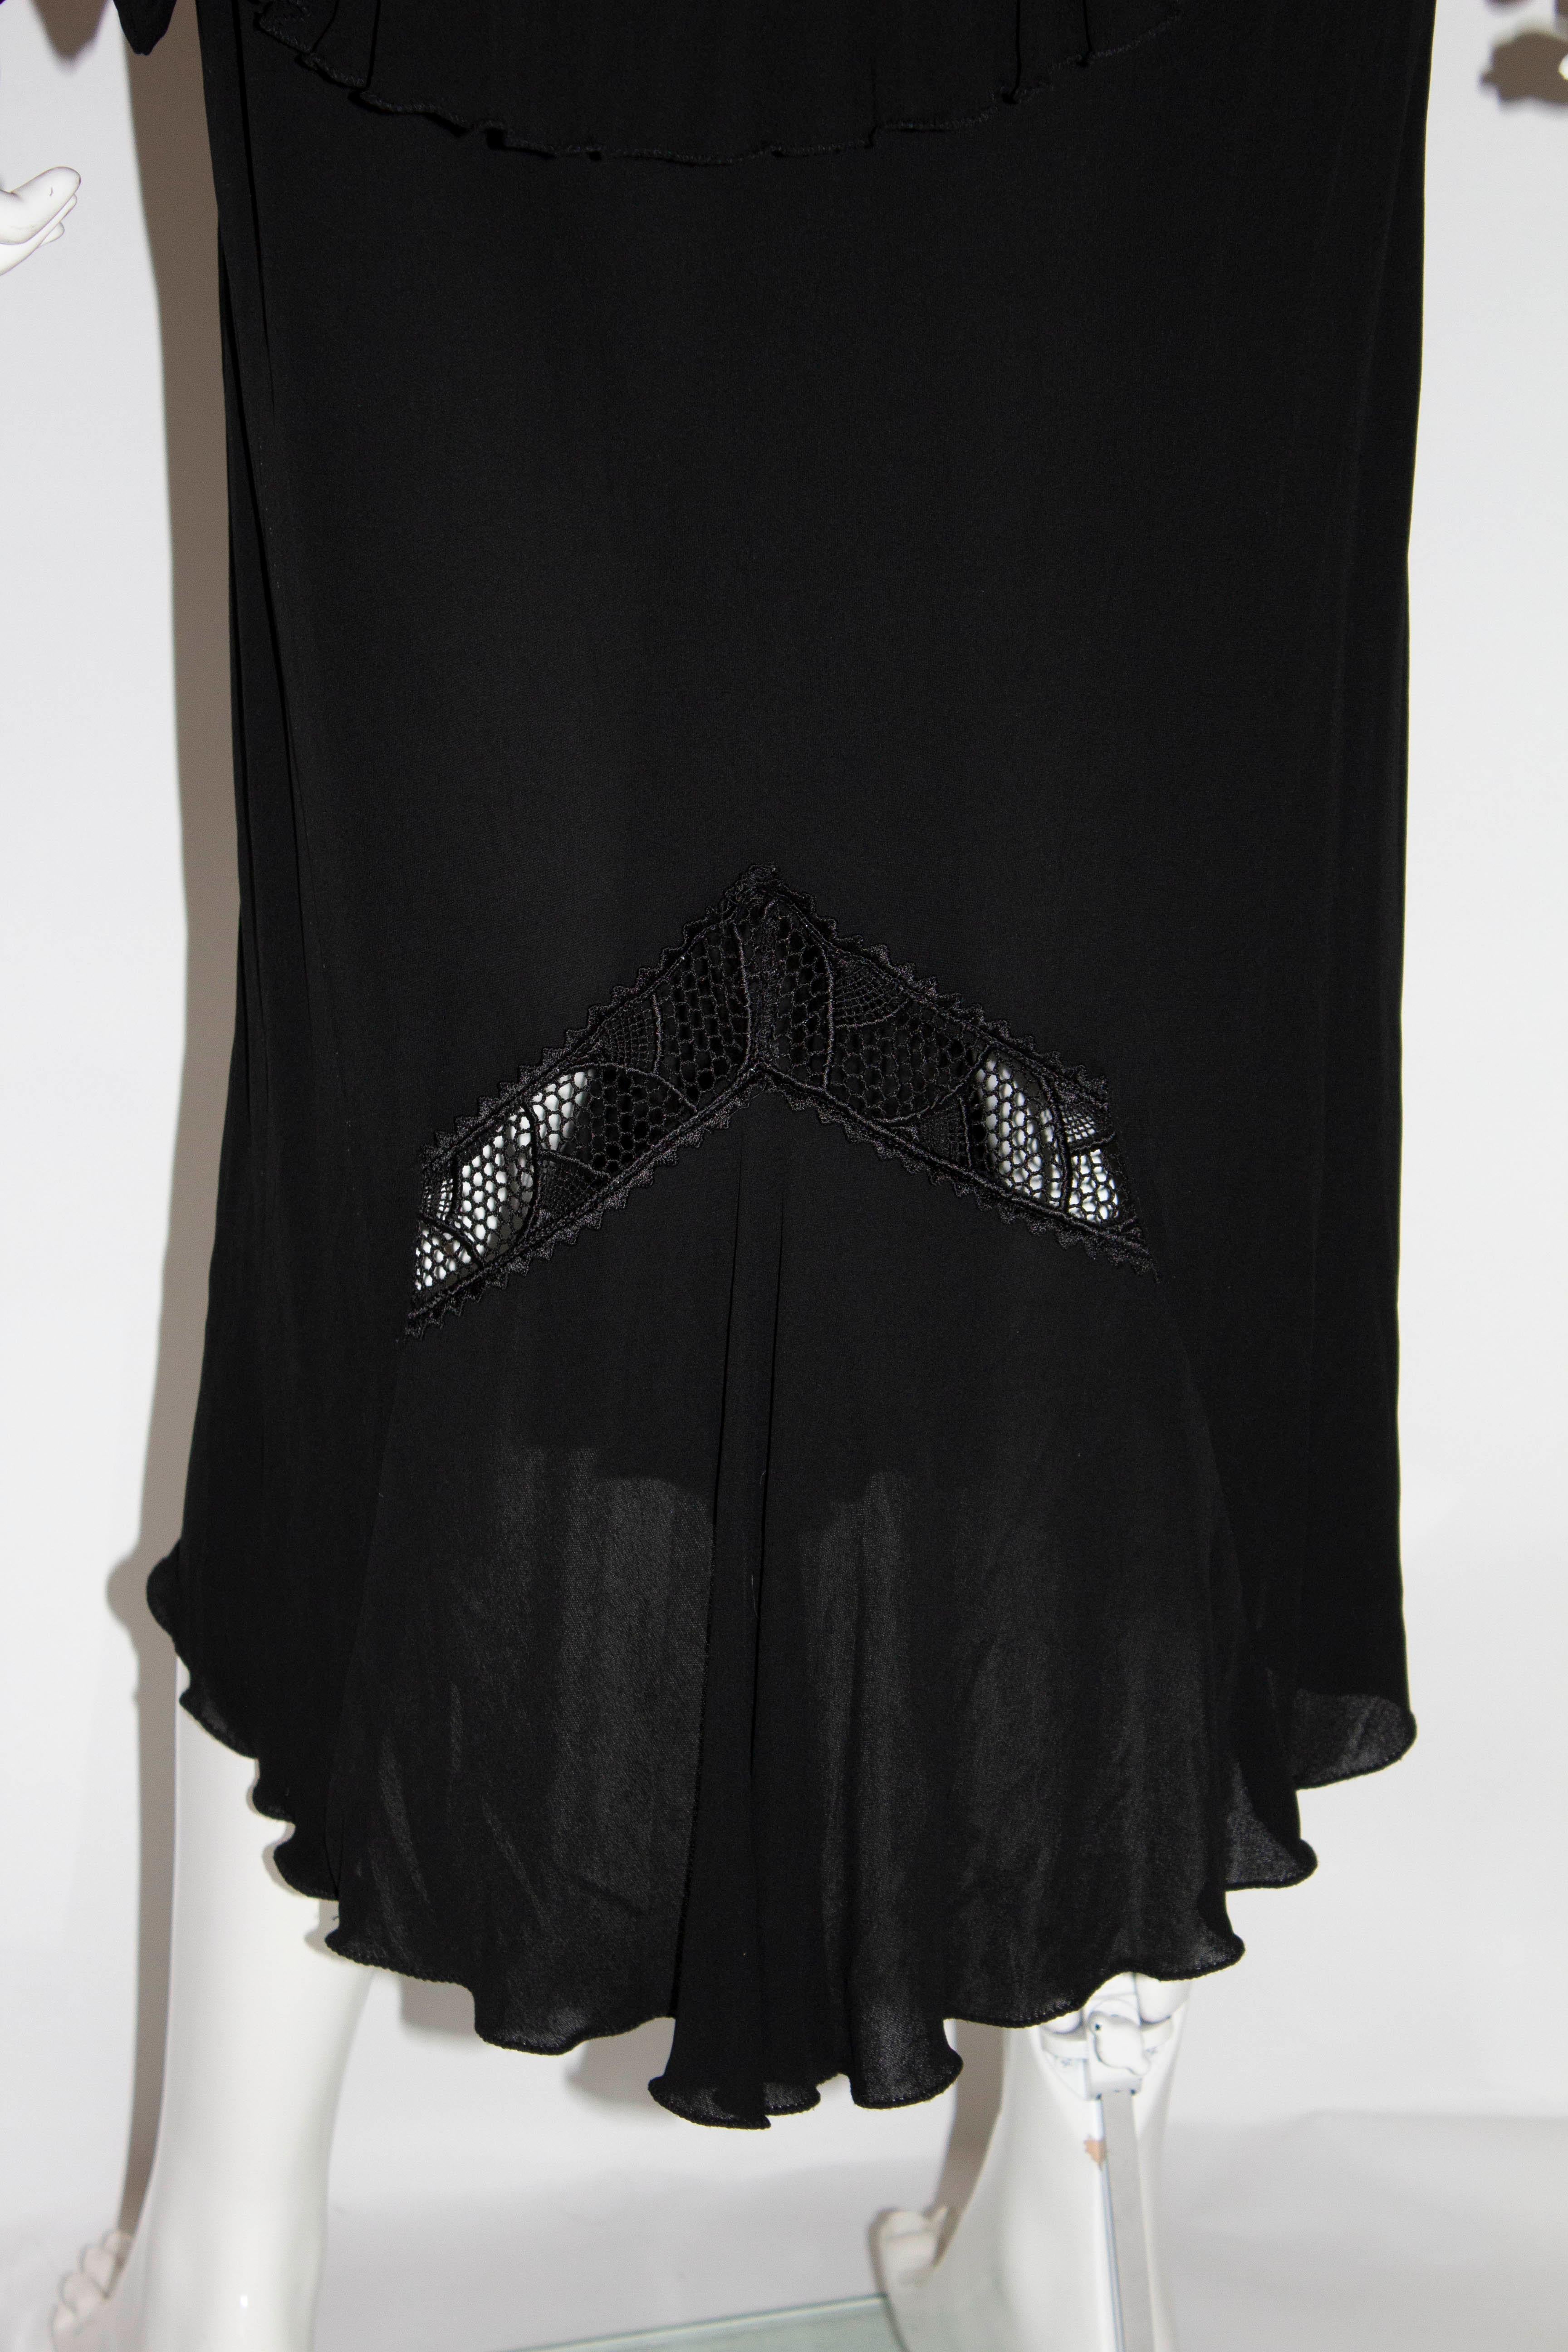 Vintage Janice Wainwright Black Dress In Good Condition For Sale In London, GB